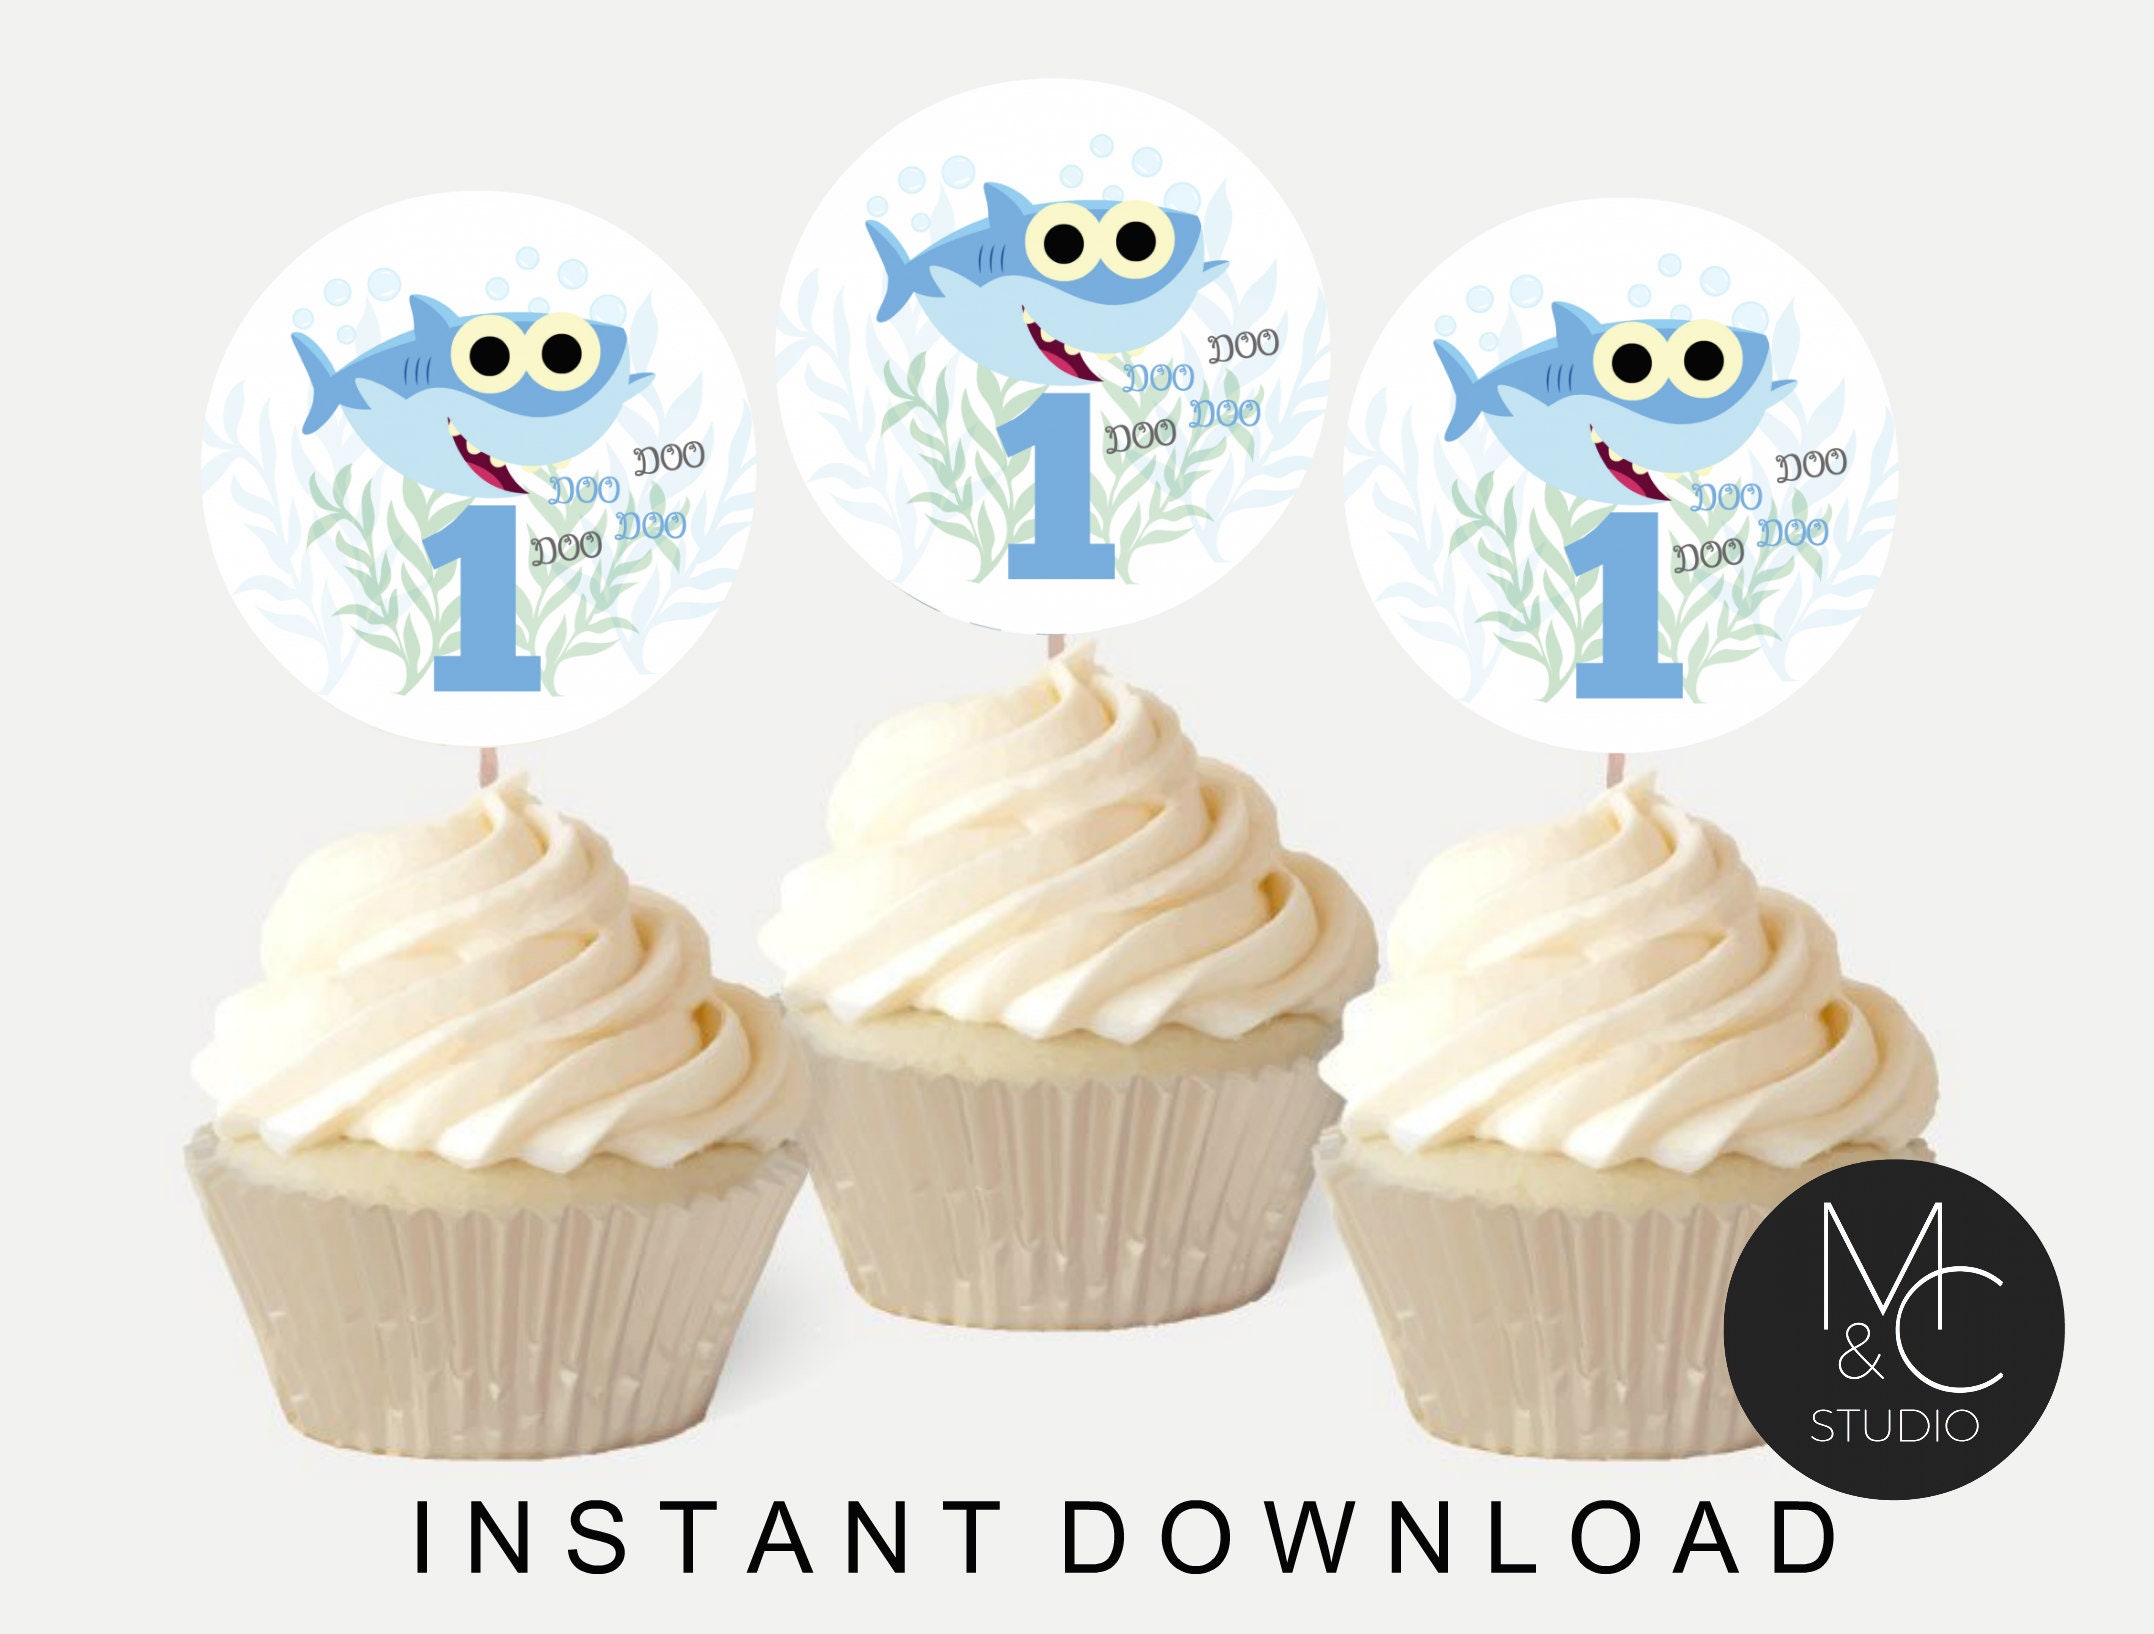 Bebefinn Cupcake Toppers, Cupcake Toppers Birthday Decorations 